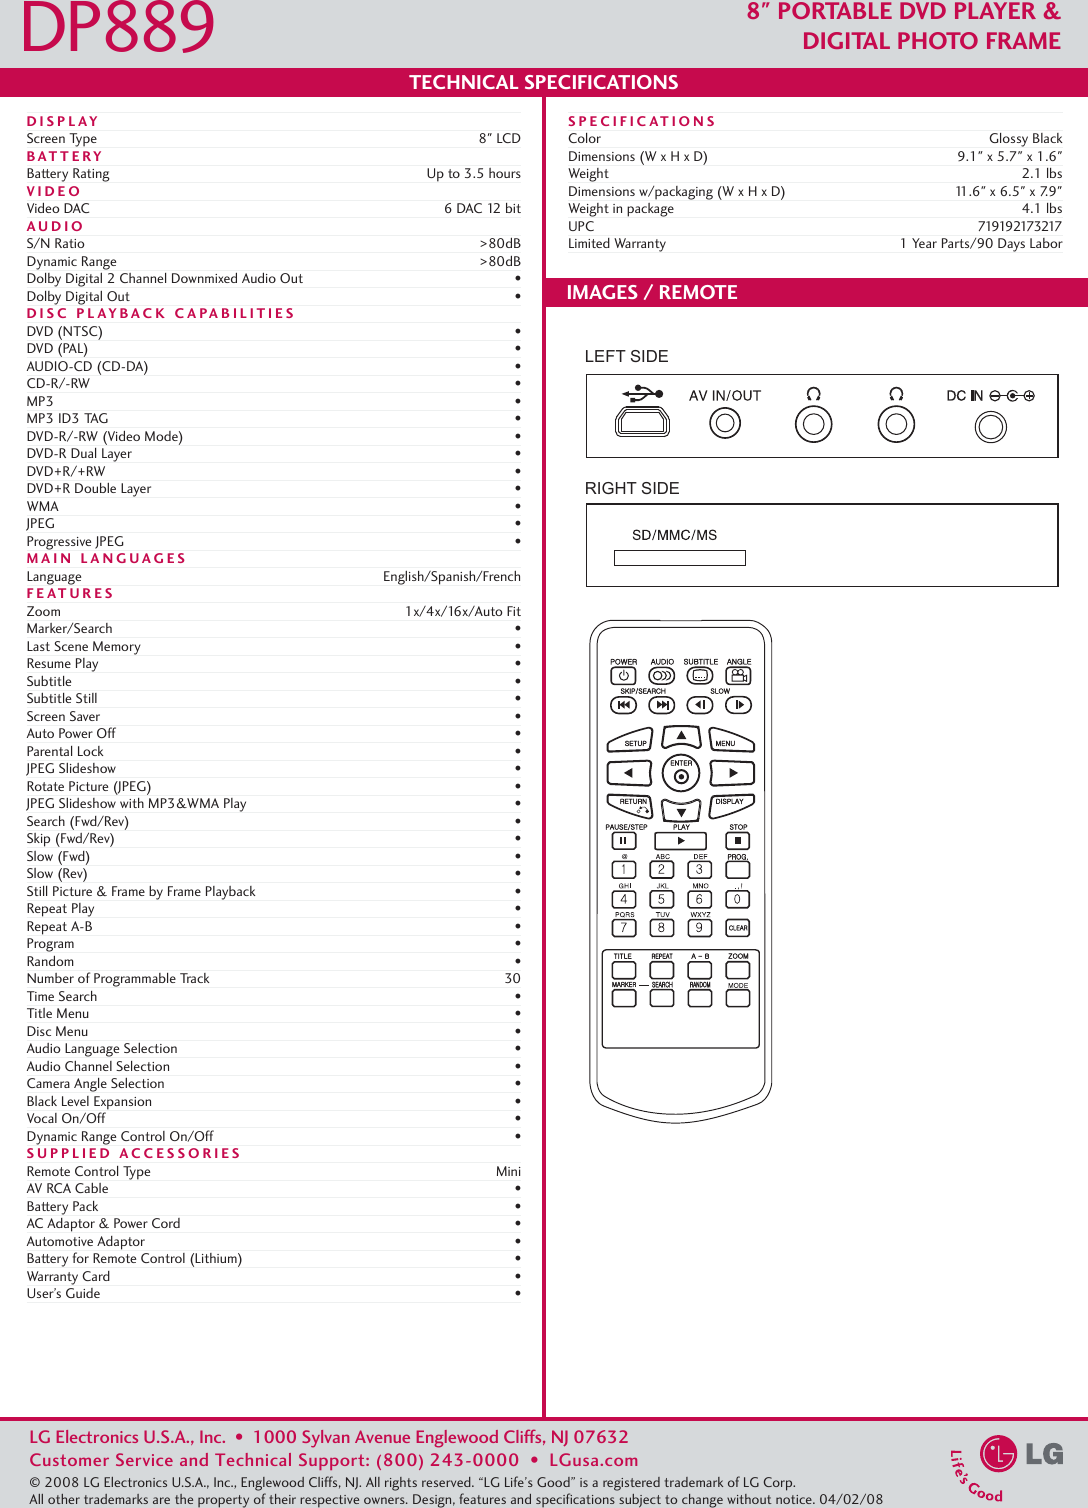 Page 2 of 2 - LG DP889 User Manual Specification H Spec Sheet